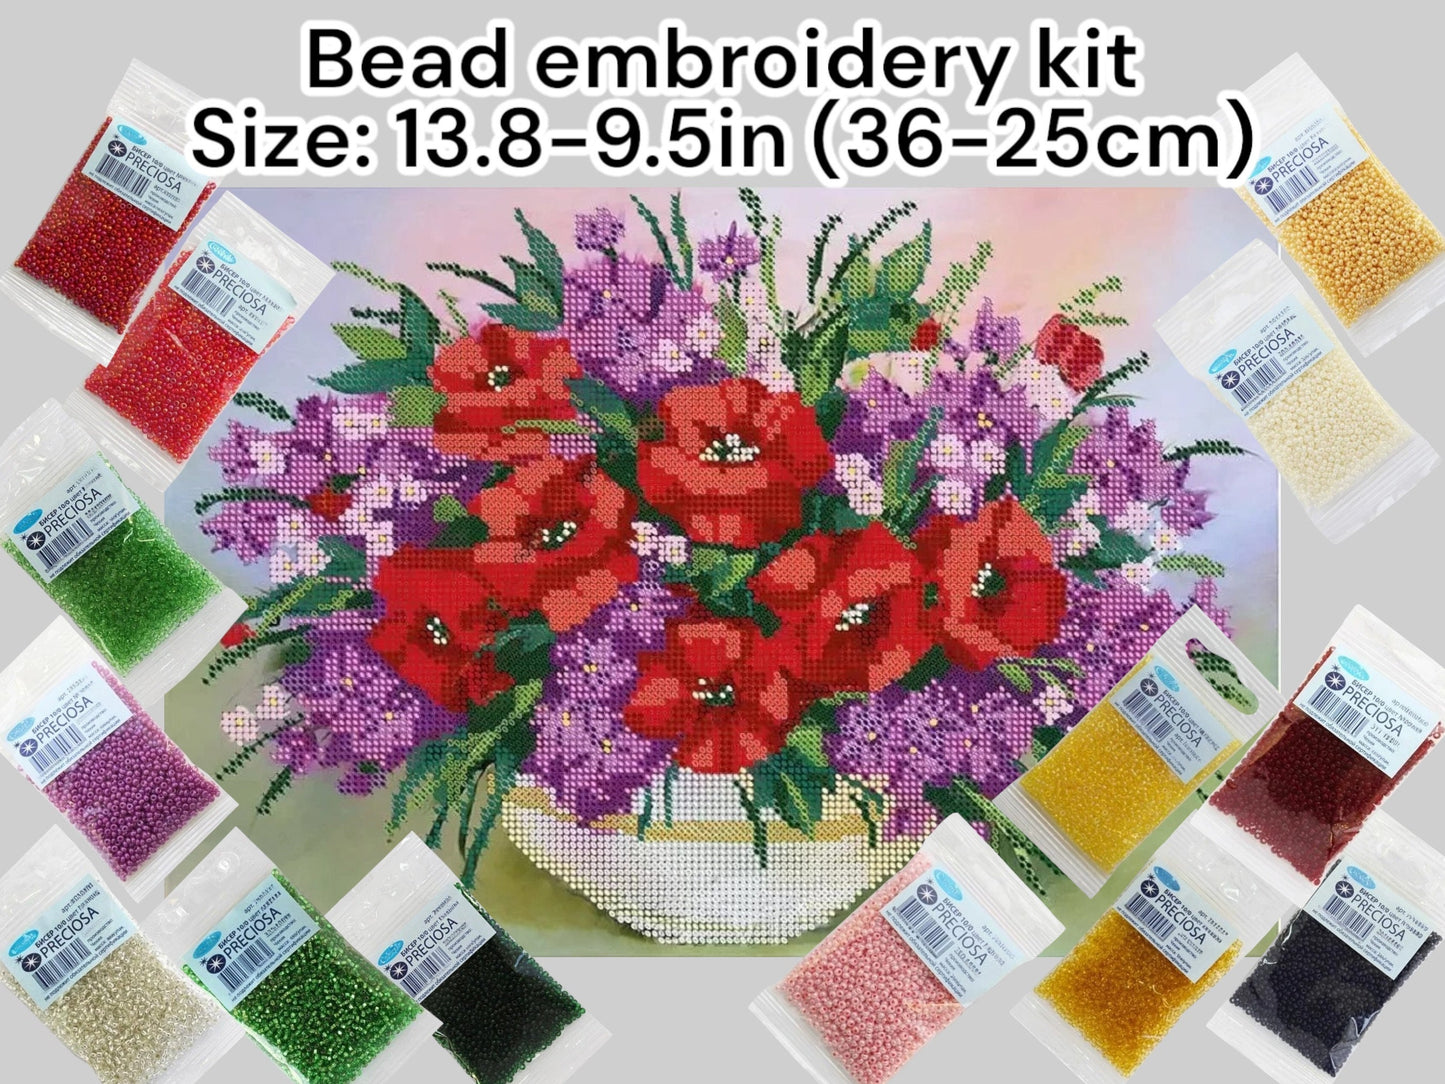 Vibrant Poppy Blooms: DIY Bead Embroidery Kit for Stunning Home Decor Size: 13.8-9.5in (36-25cm) - VadymShop